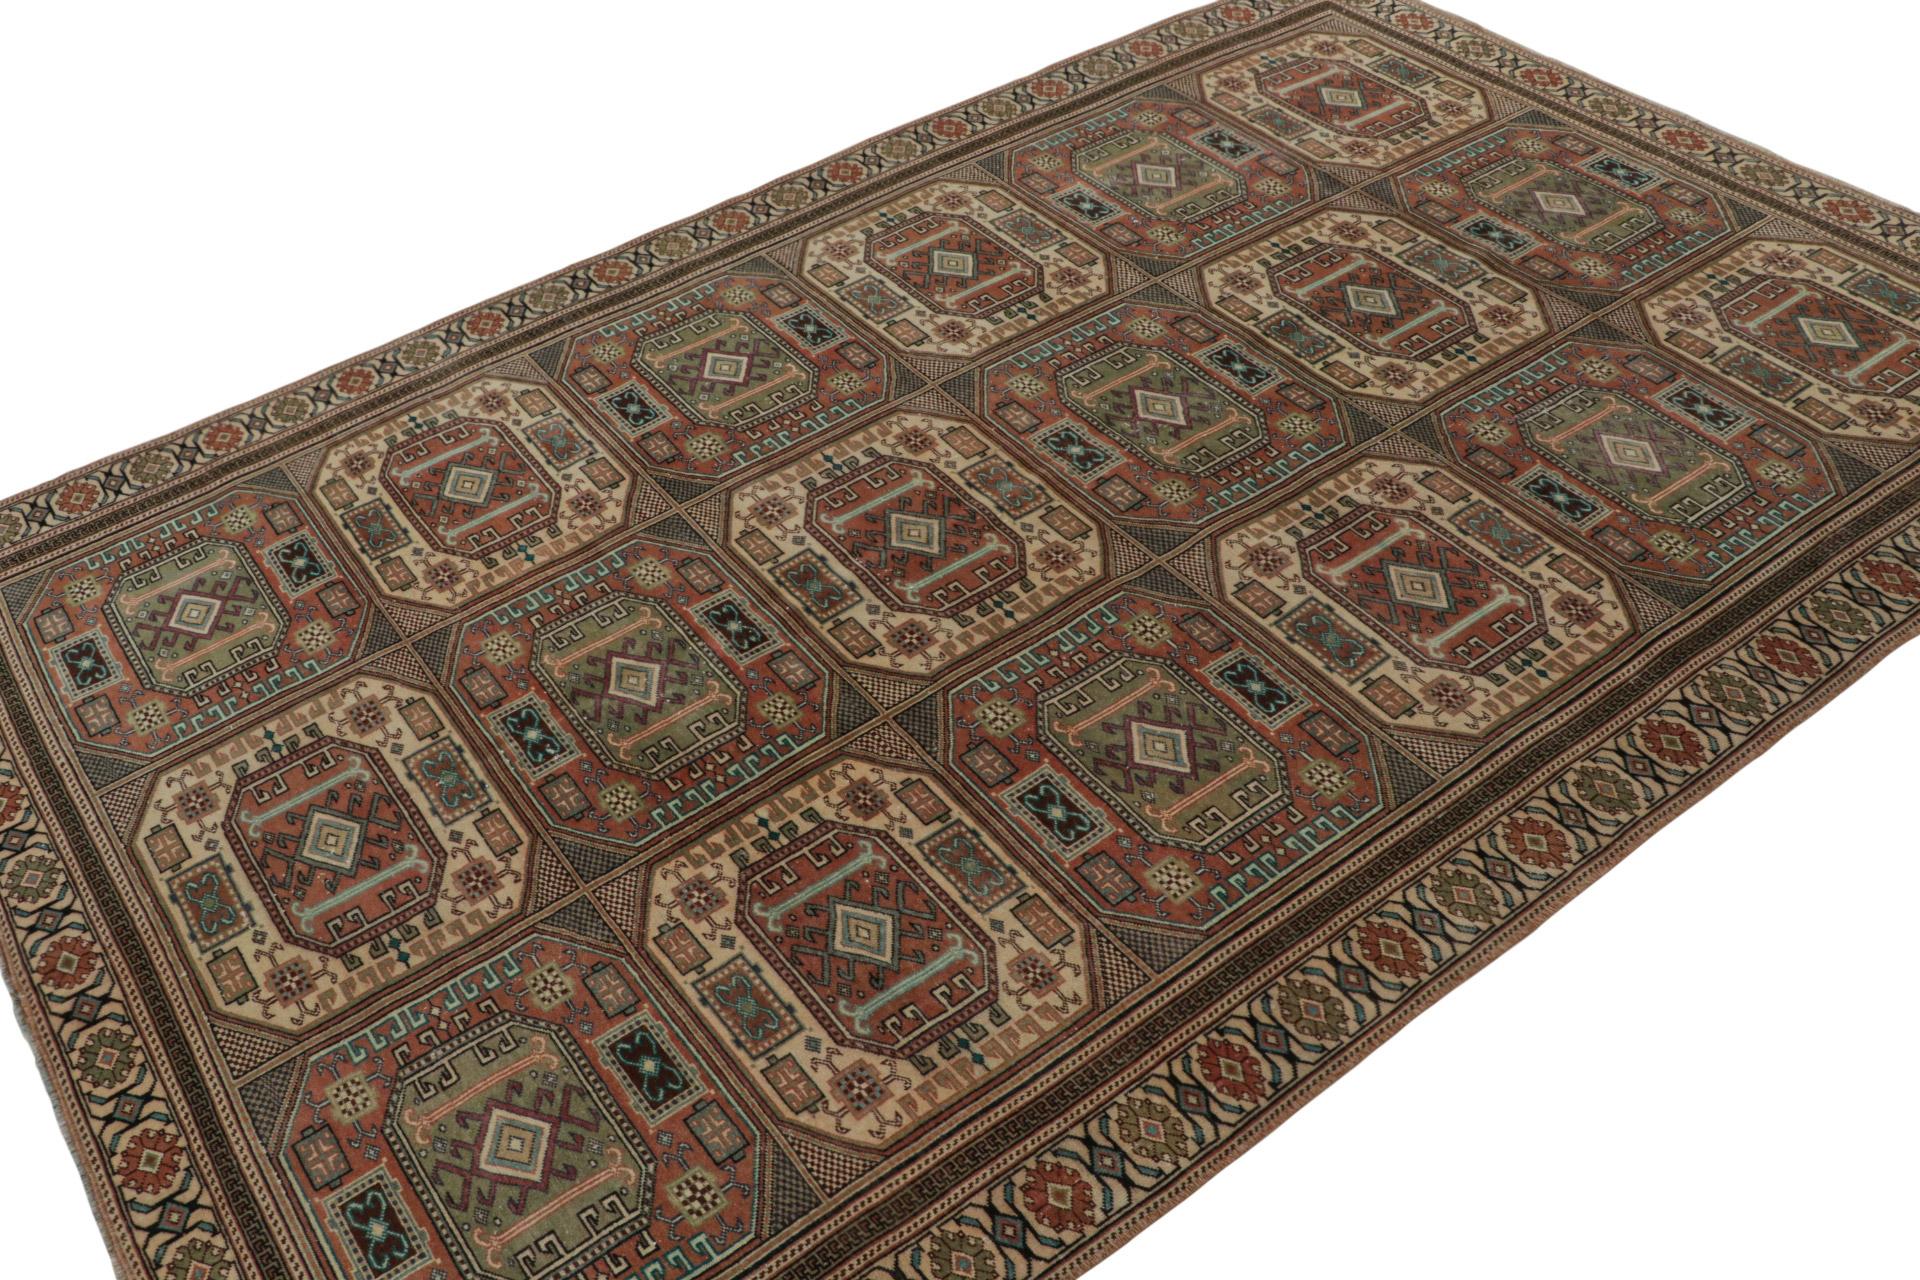 Hand Knotted in wool, this vintage 6x10 Oushak rug with tribal motifs and references to floral symbols in the geometric patterns, is from a distinct collection of young end-of-the-mid-20th-century pieces with their own rare boho chic beauty. 

On